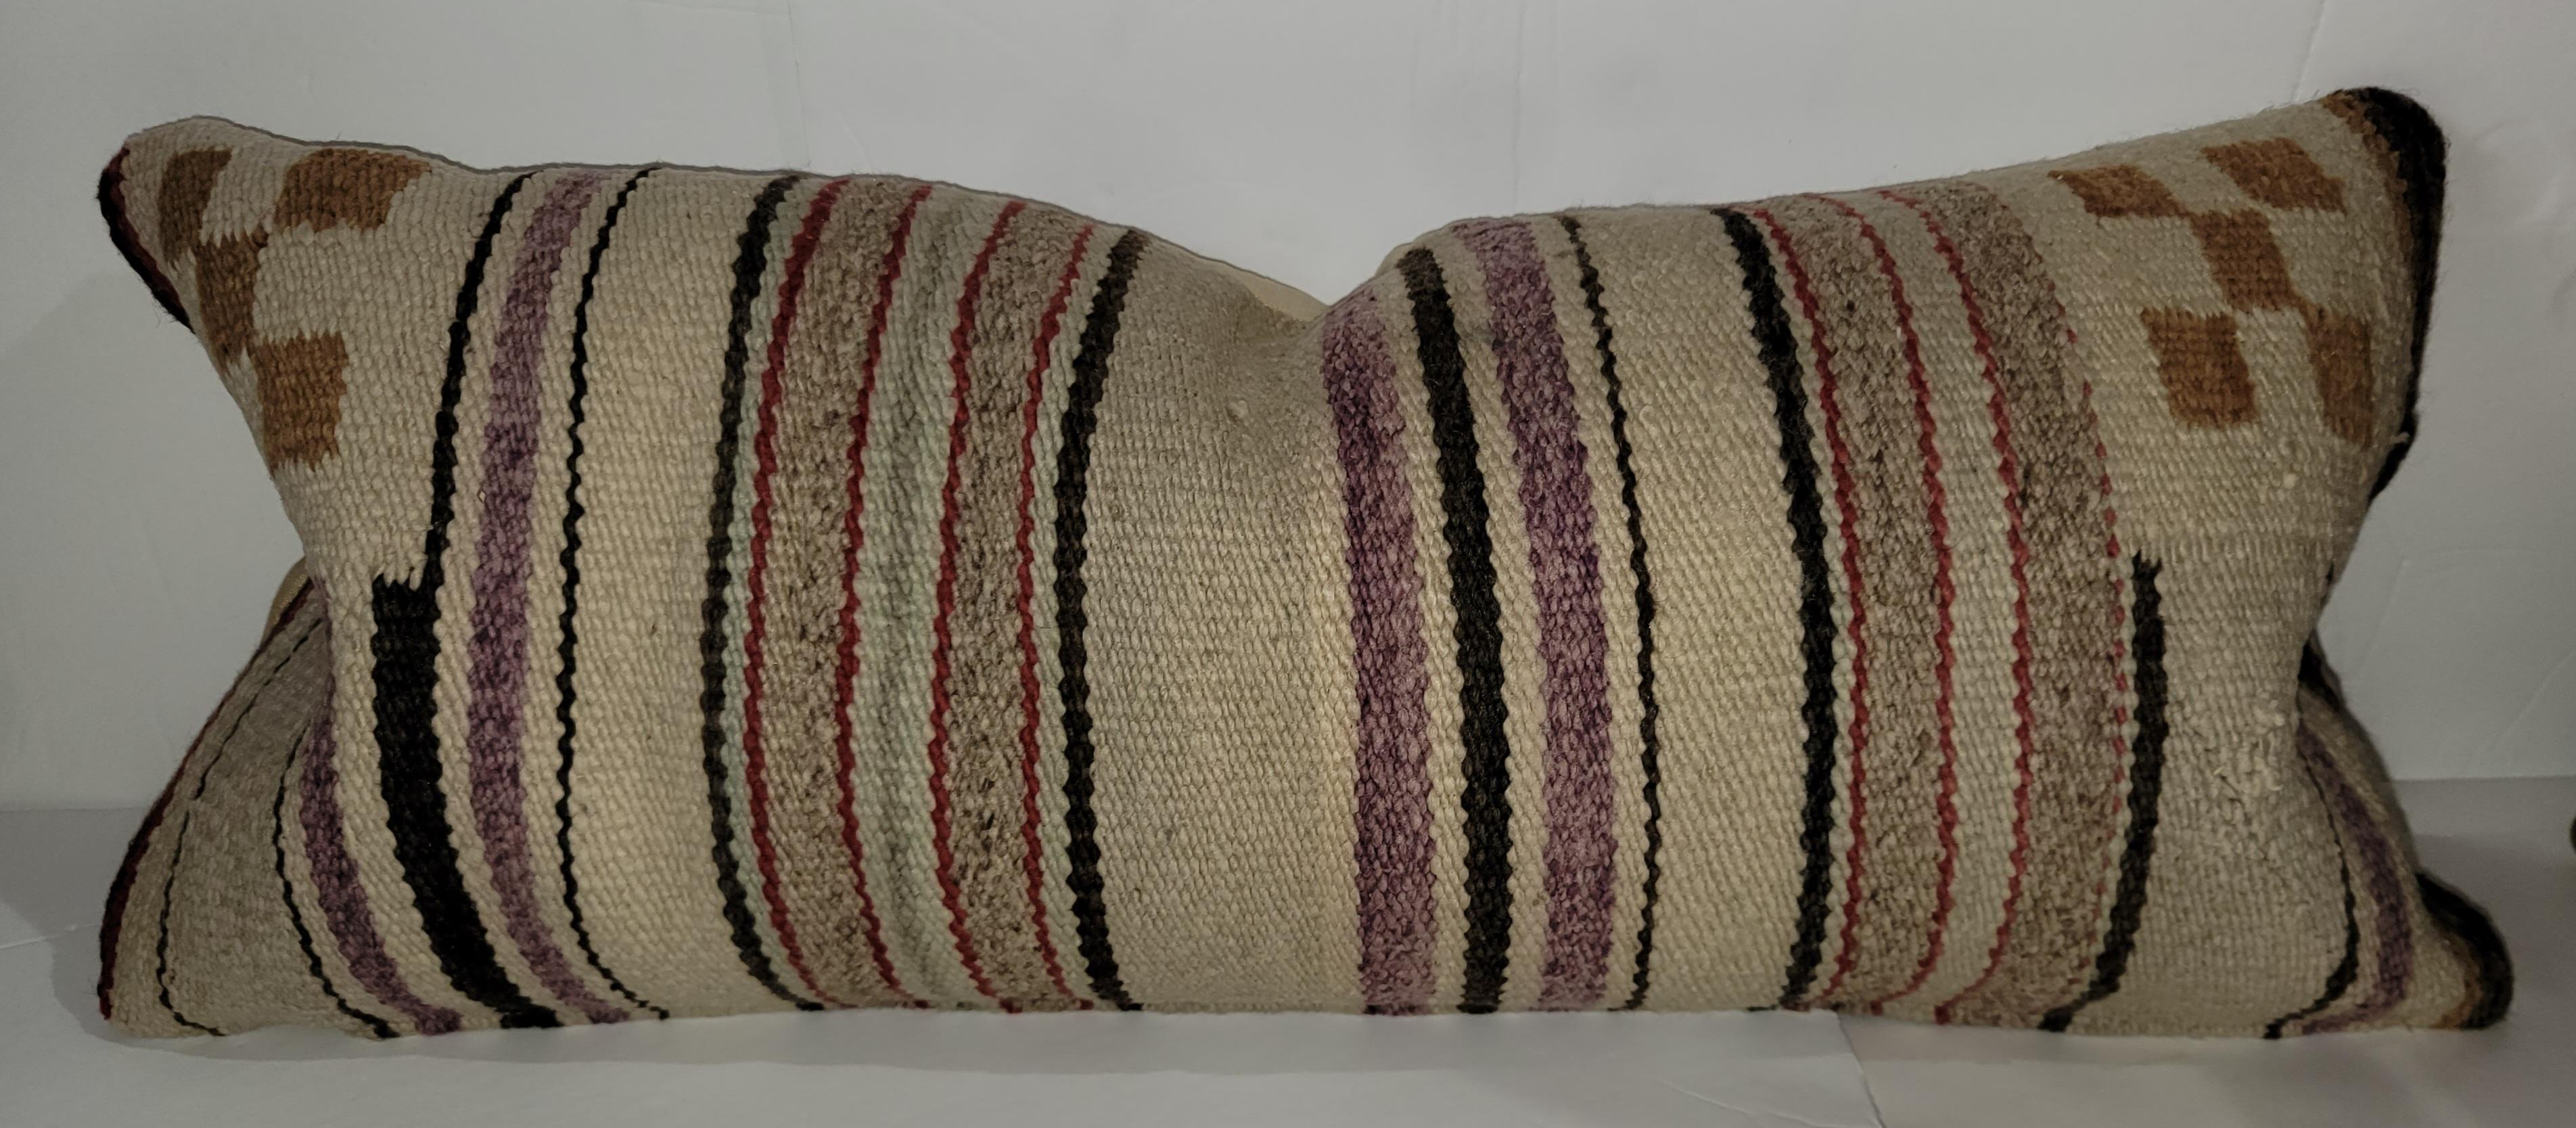 Hand-Woven Navajo Indian Weaving Bolster Pillows, Pair For Sale